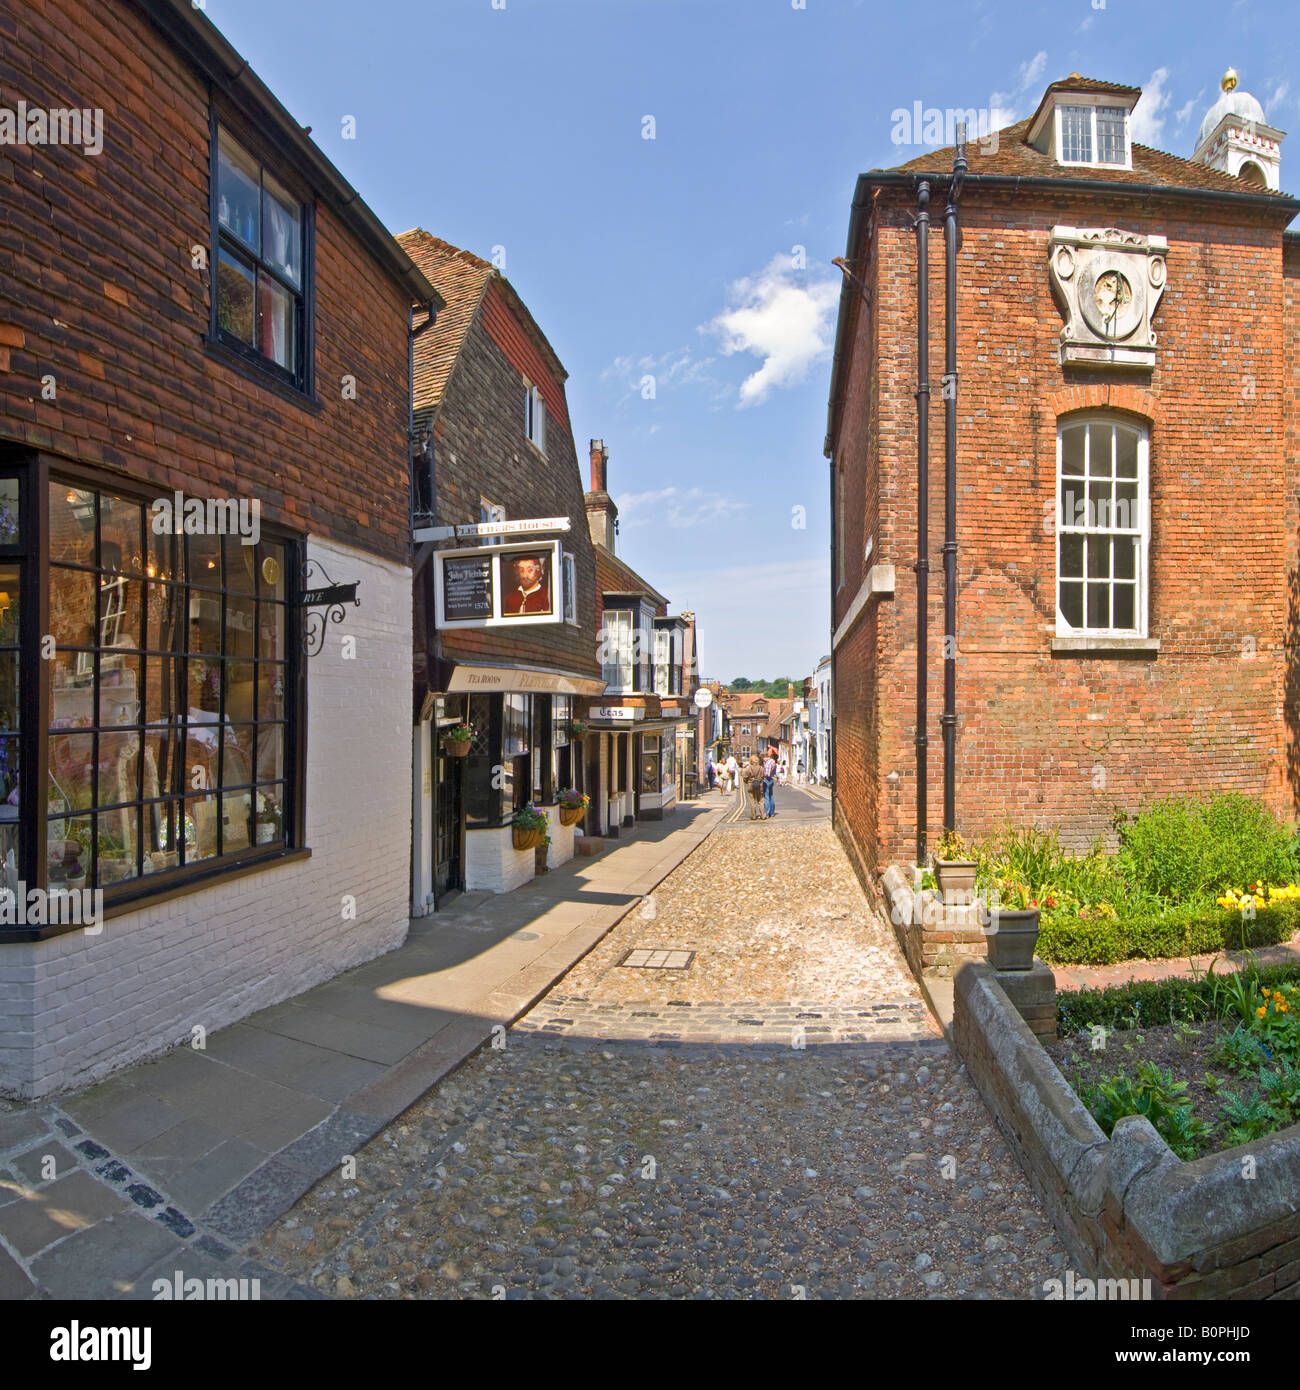 A 2 picture stitch panoramic image of Lion street showing typical architecture of Rye. Stock Photo